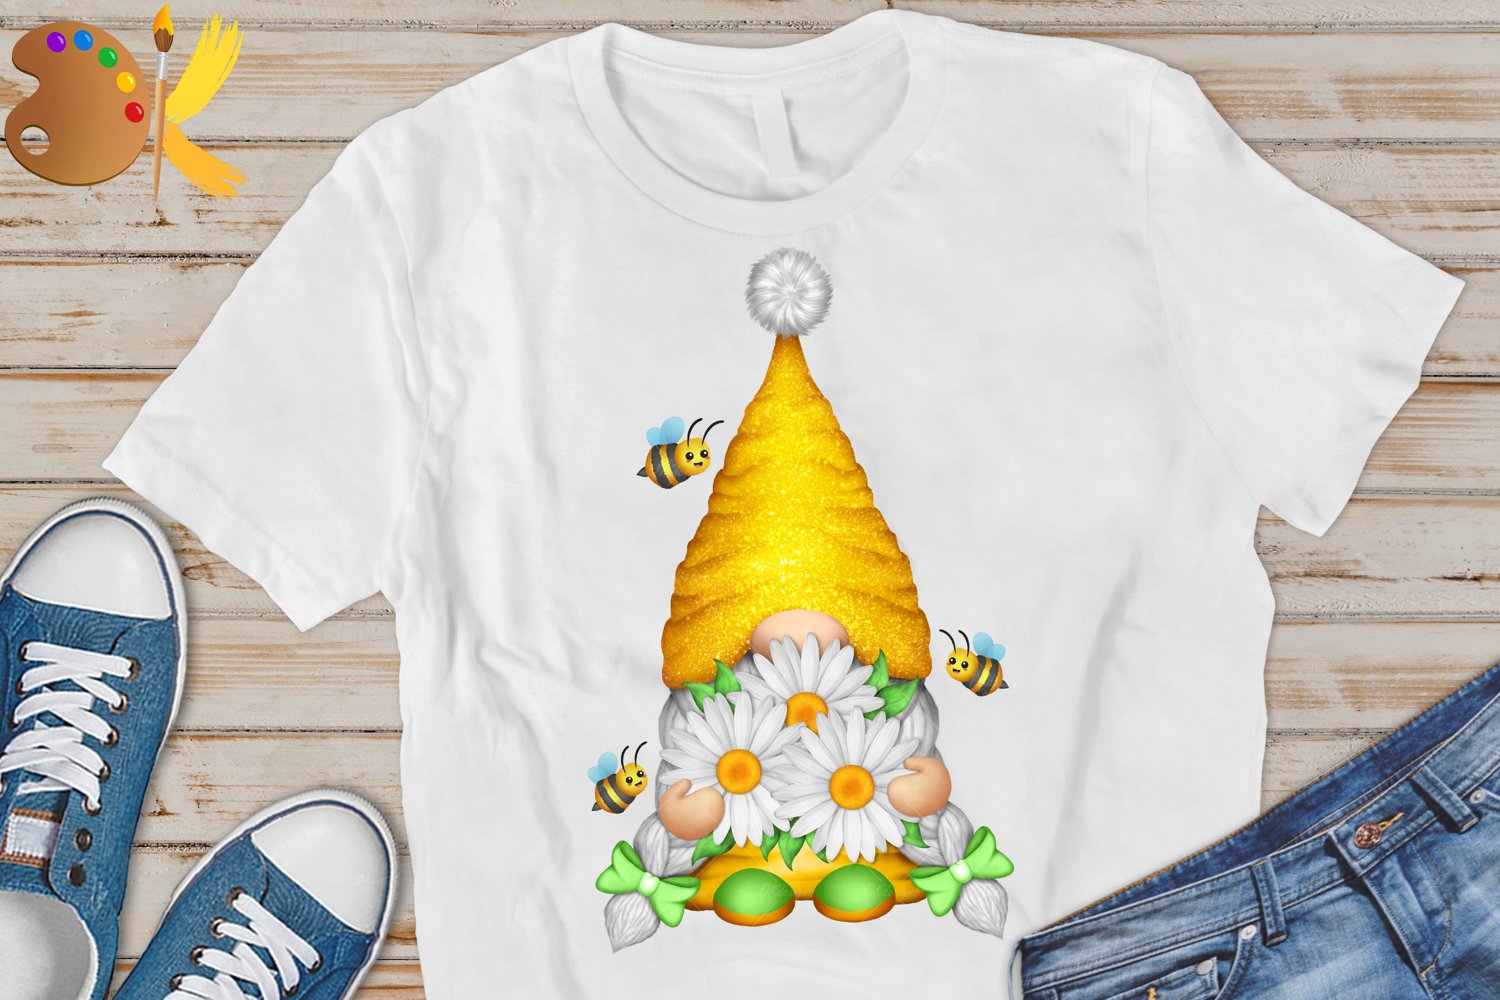 Cute yellow gnome with daises - t-shirt.